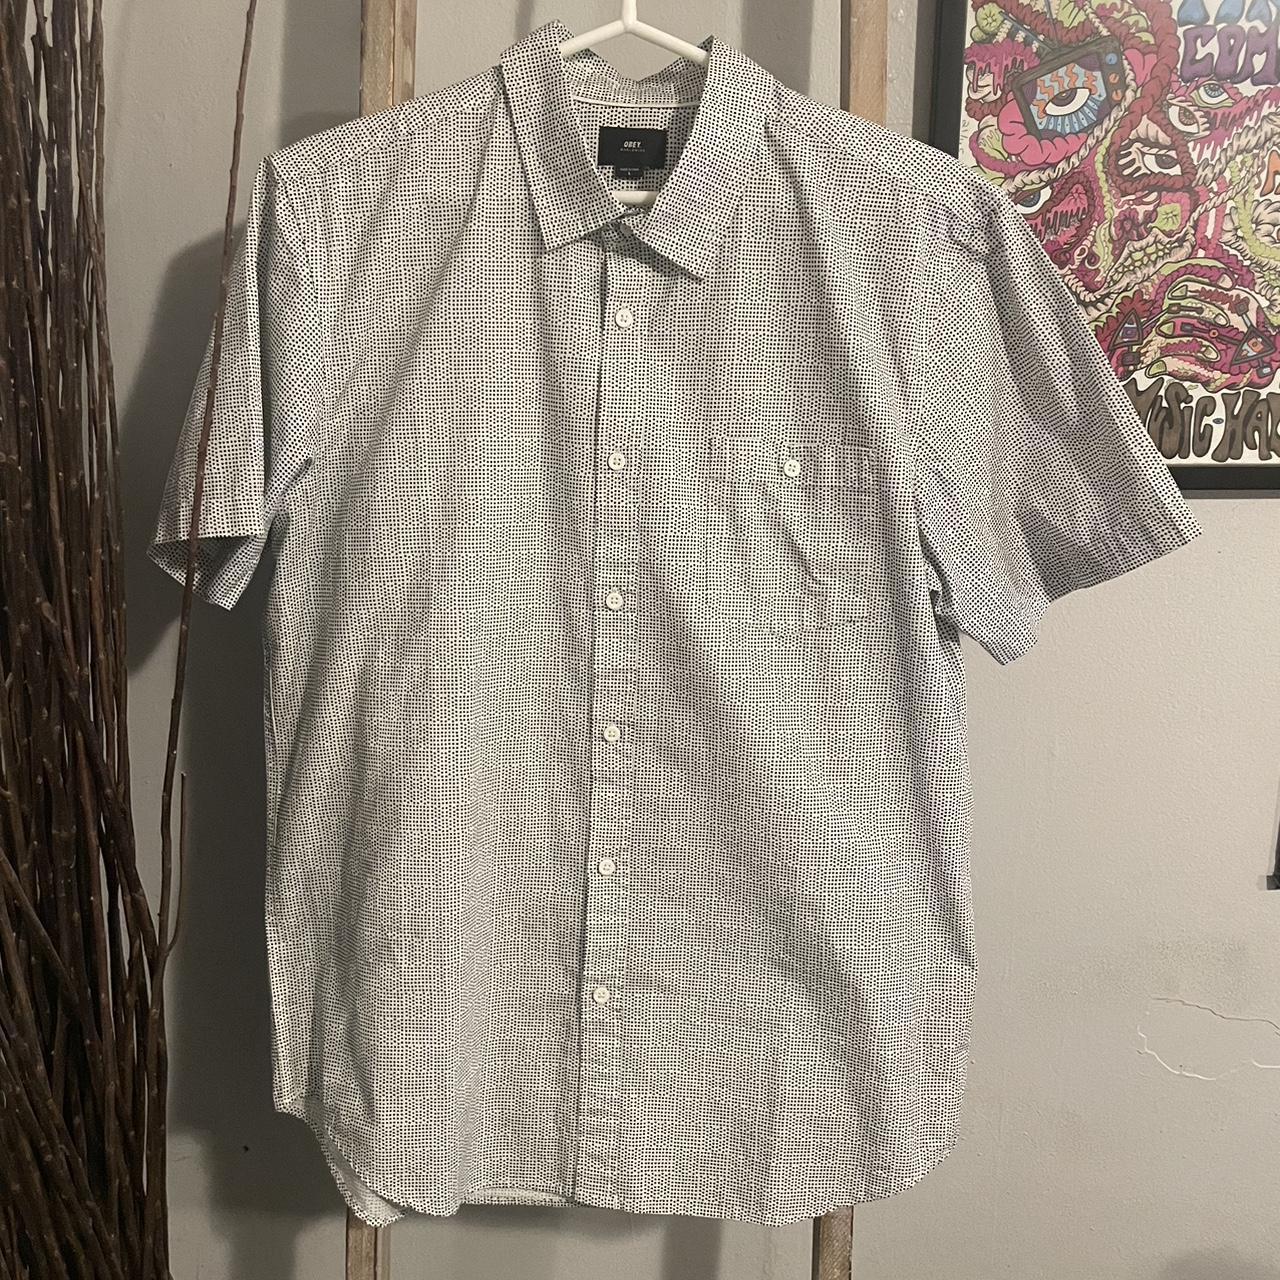 Obey short sleeve collared casual dress shirt. Great... - Depop